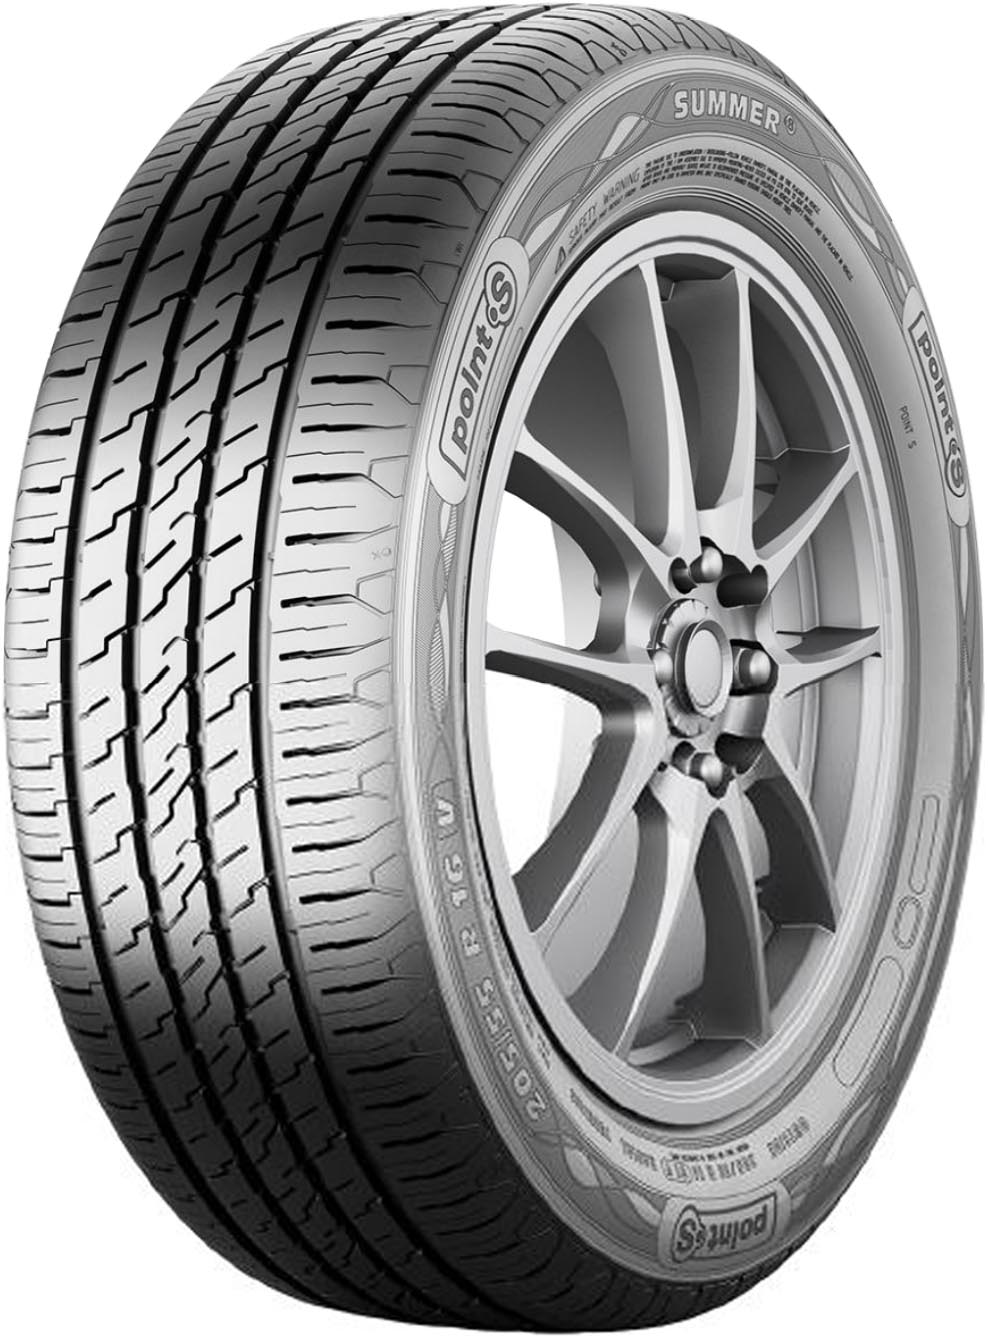 POINTS SUMMER S 155/80R13 79T